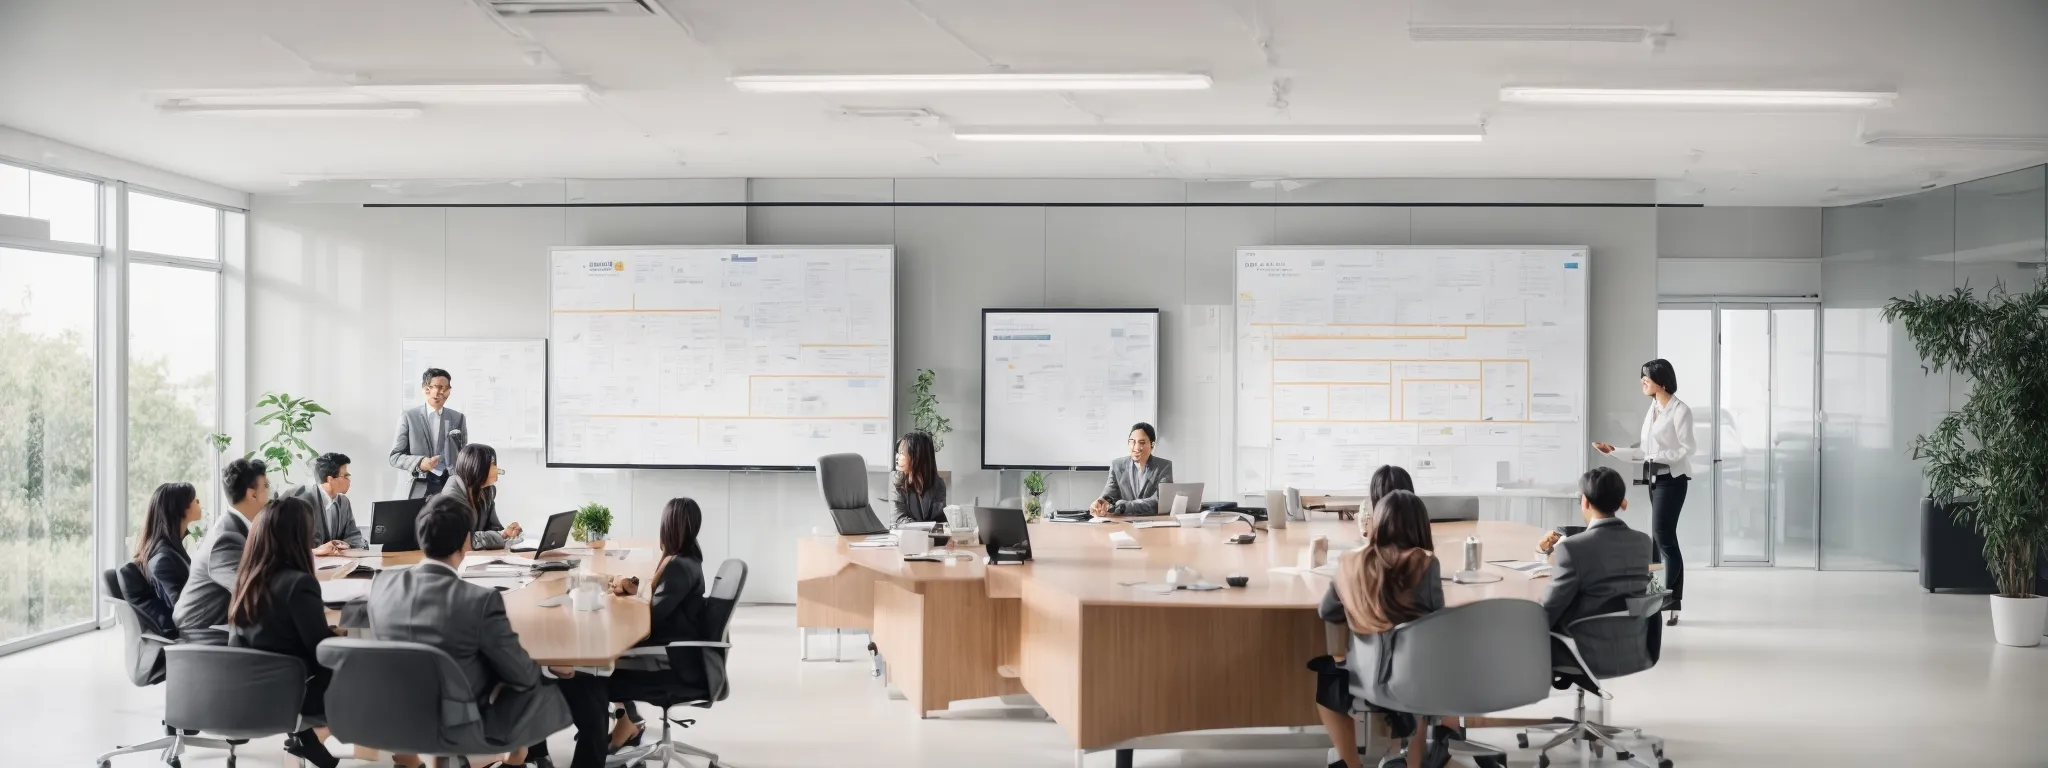 a strategic meeting with a large, clear whiteboard displaying a web structure diagram in a bright, modern office.